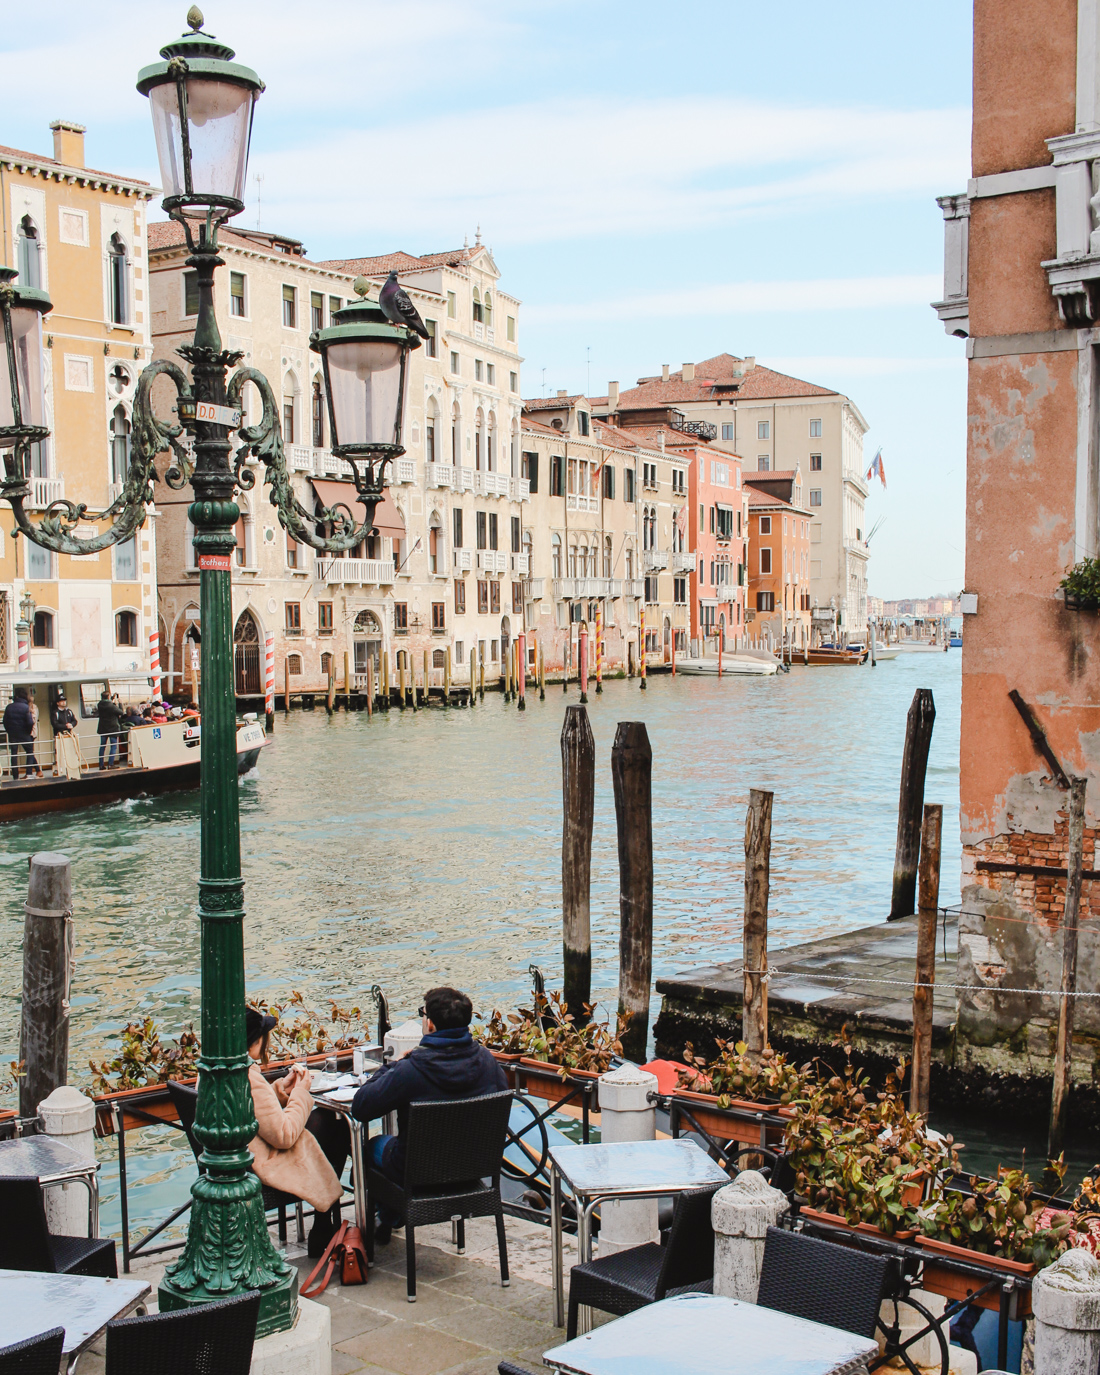 Couple eating outdoors in Venice